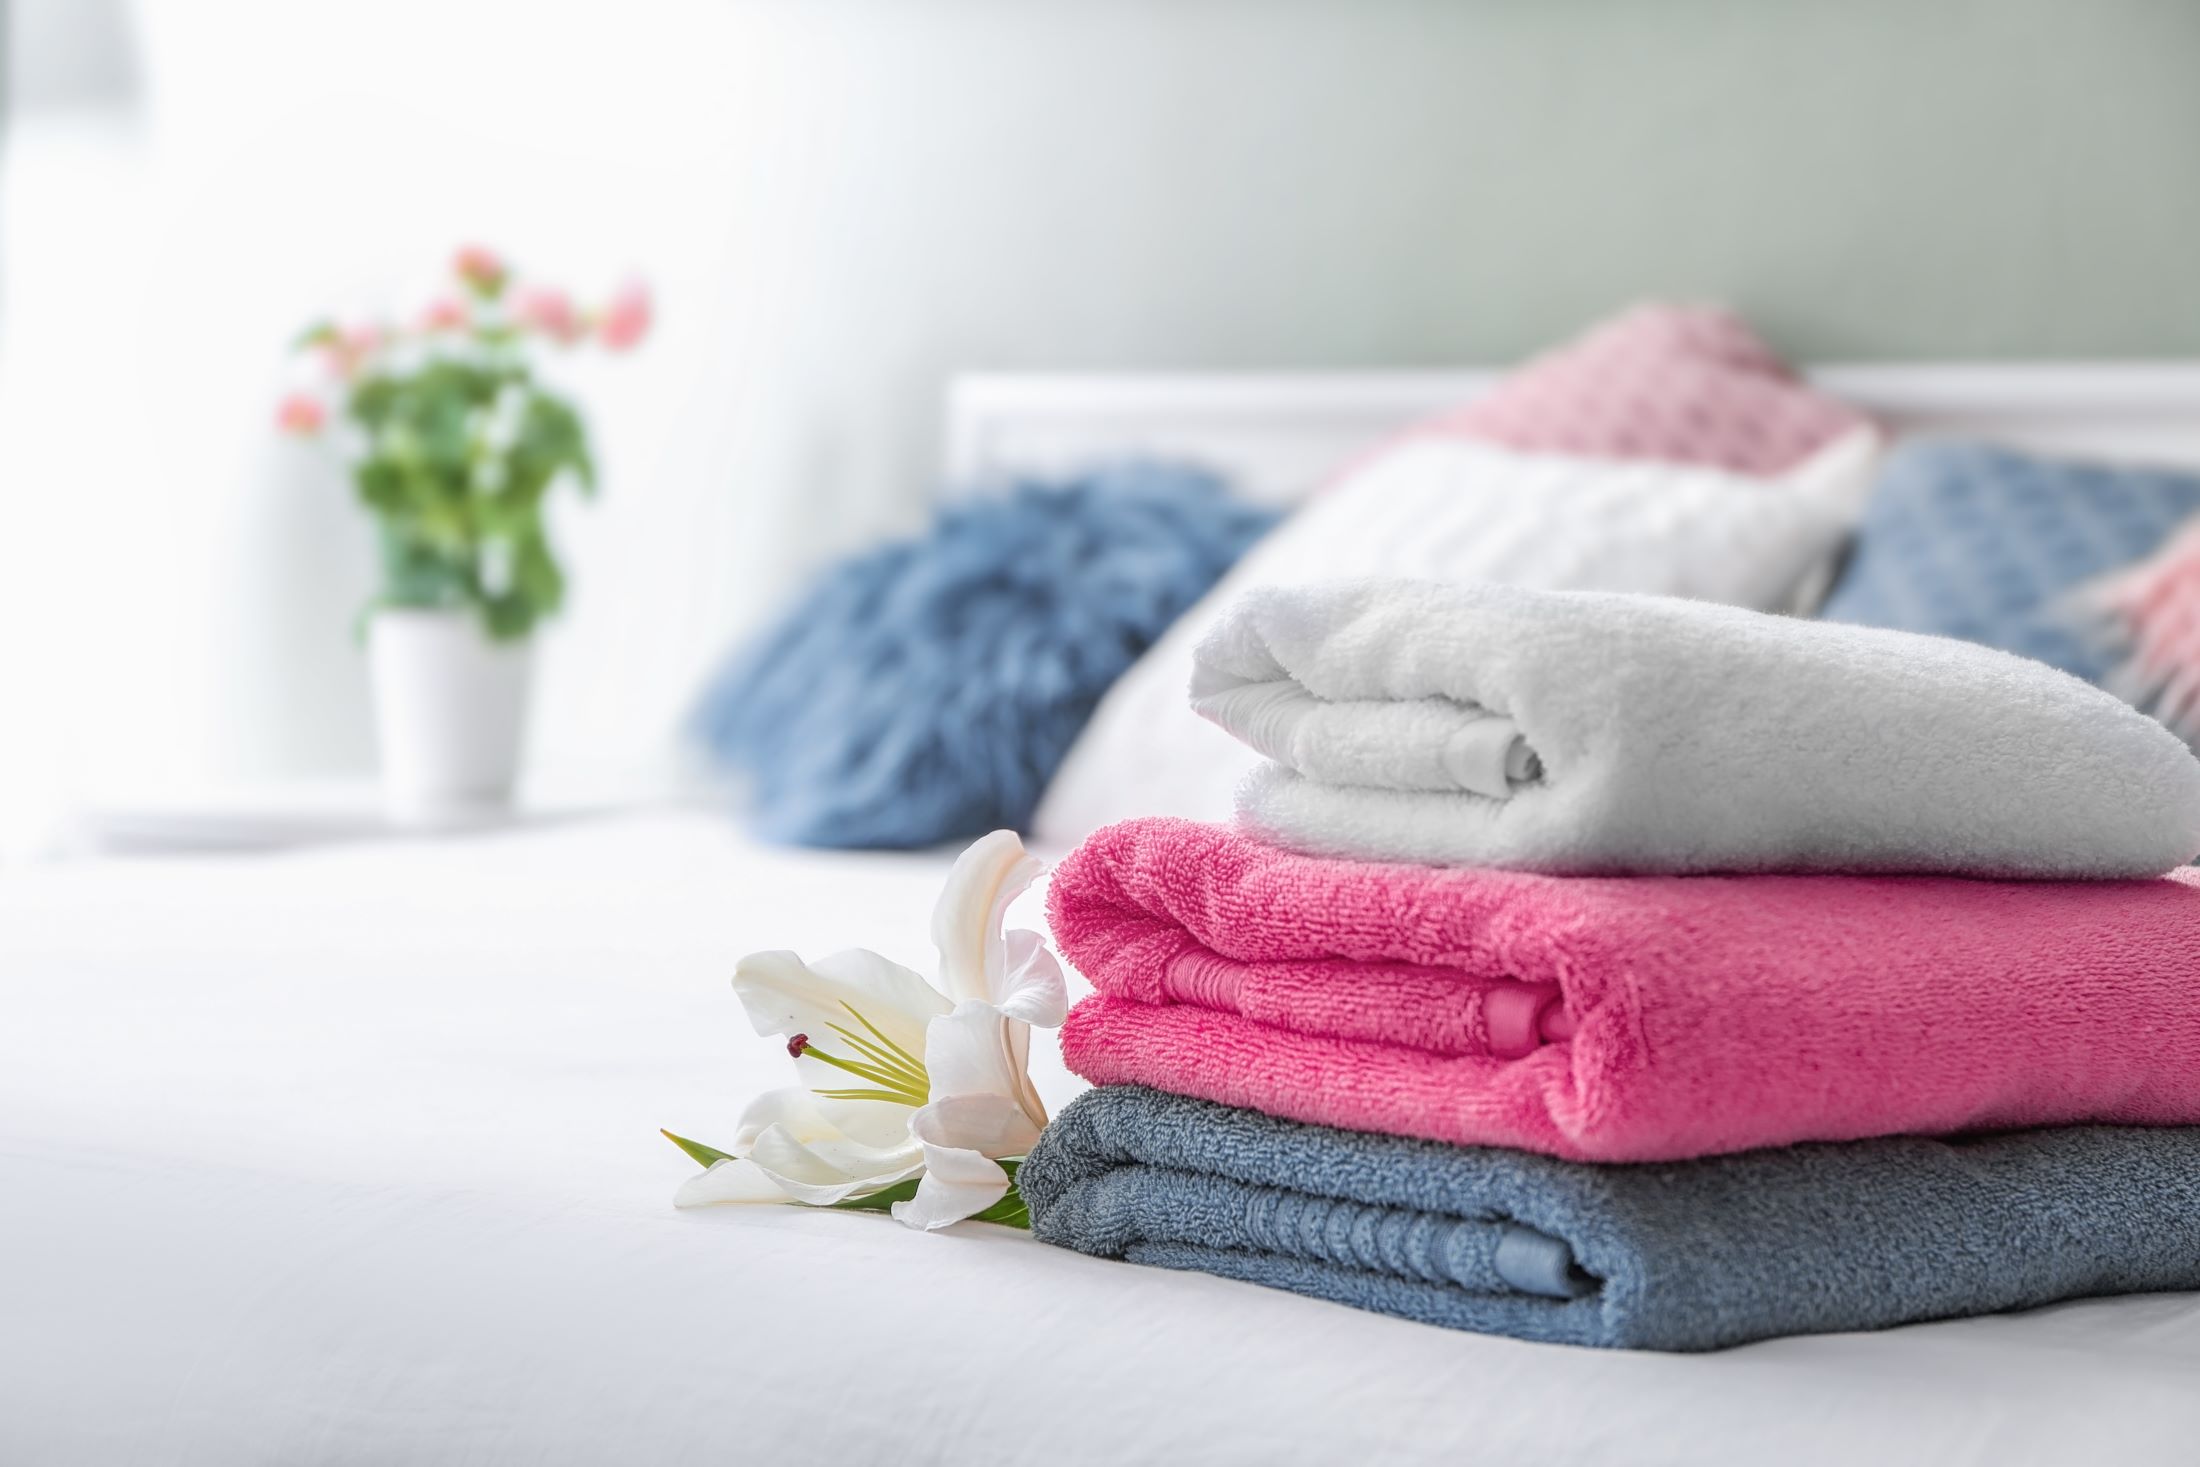 Laundry services for hotel guests - The Laundry Lady NZ